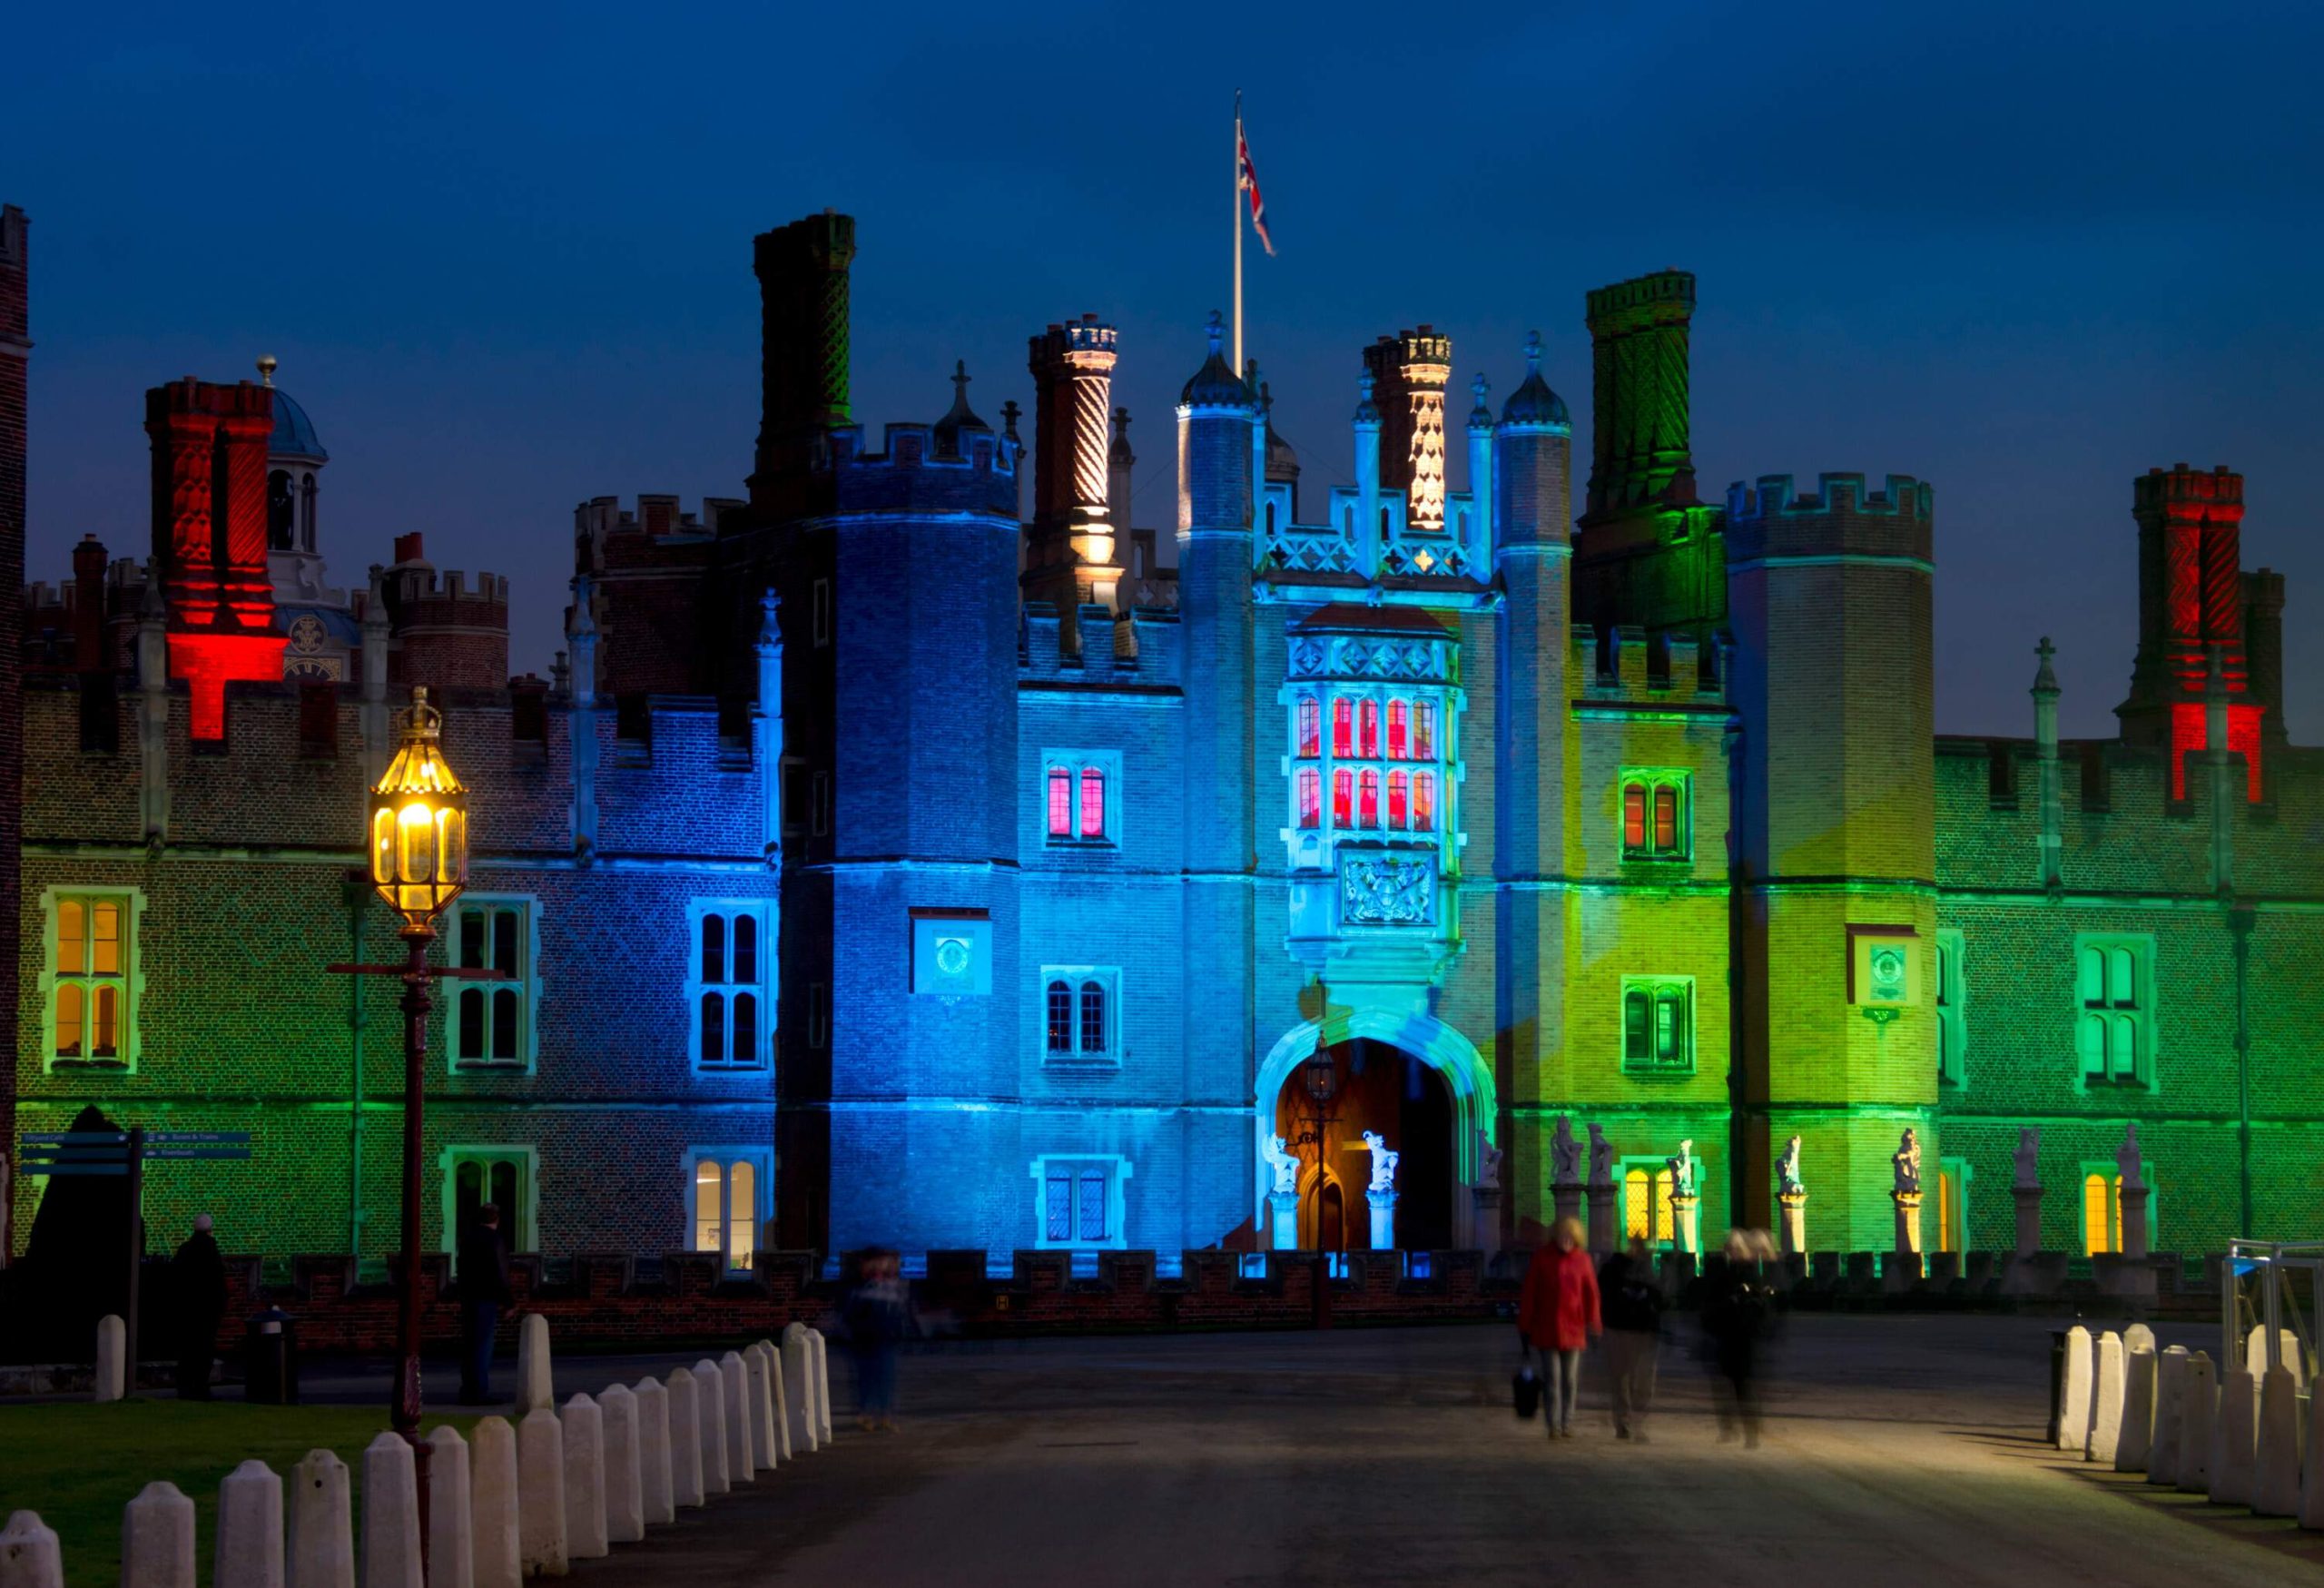 The facade of a royal palace is illuminated with different colours at night.